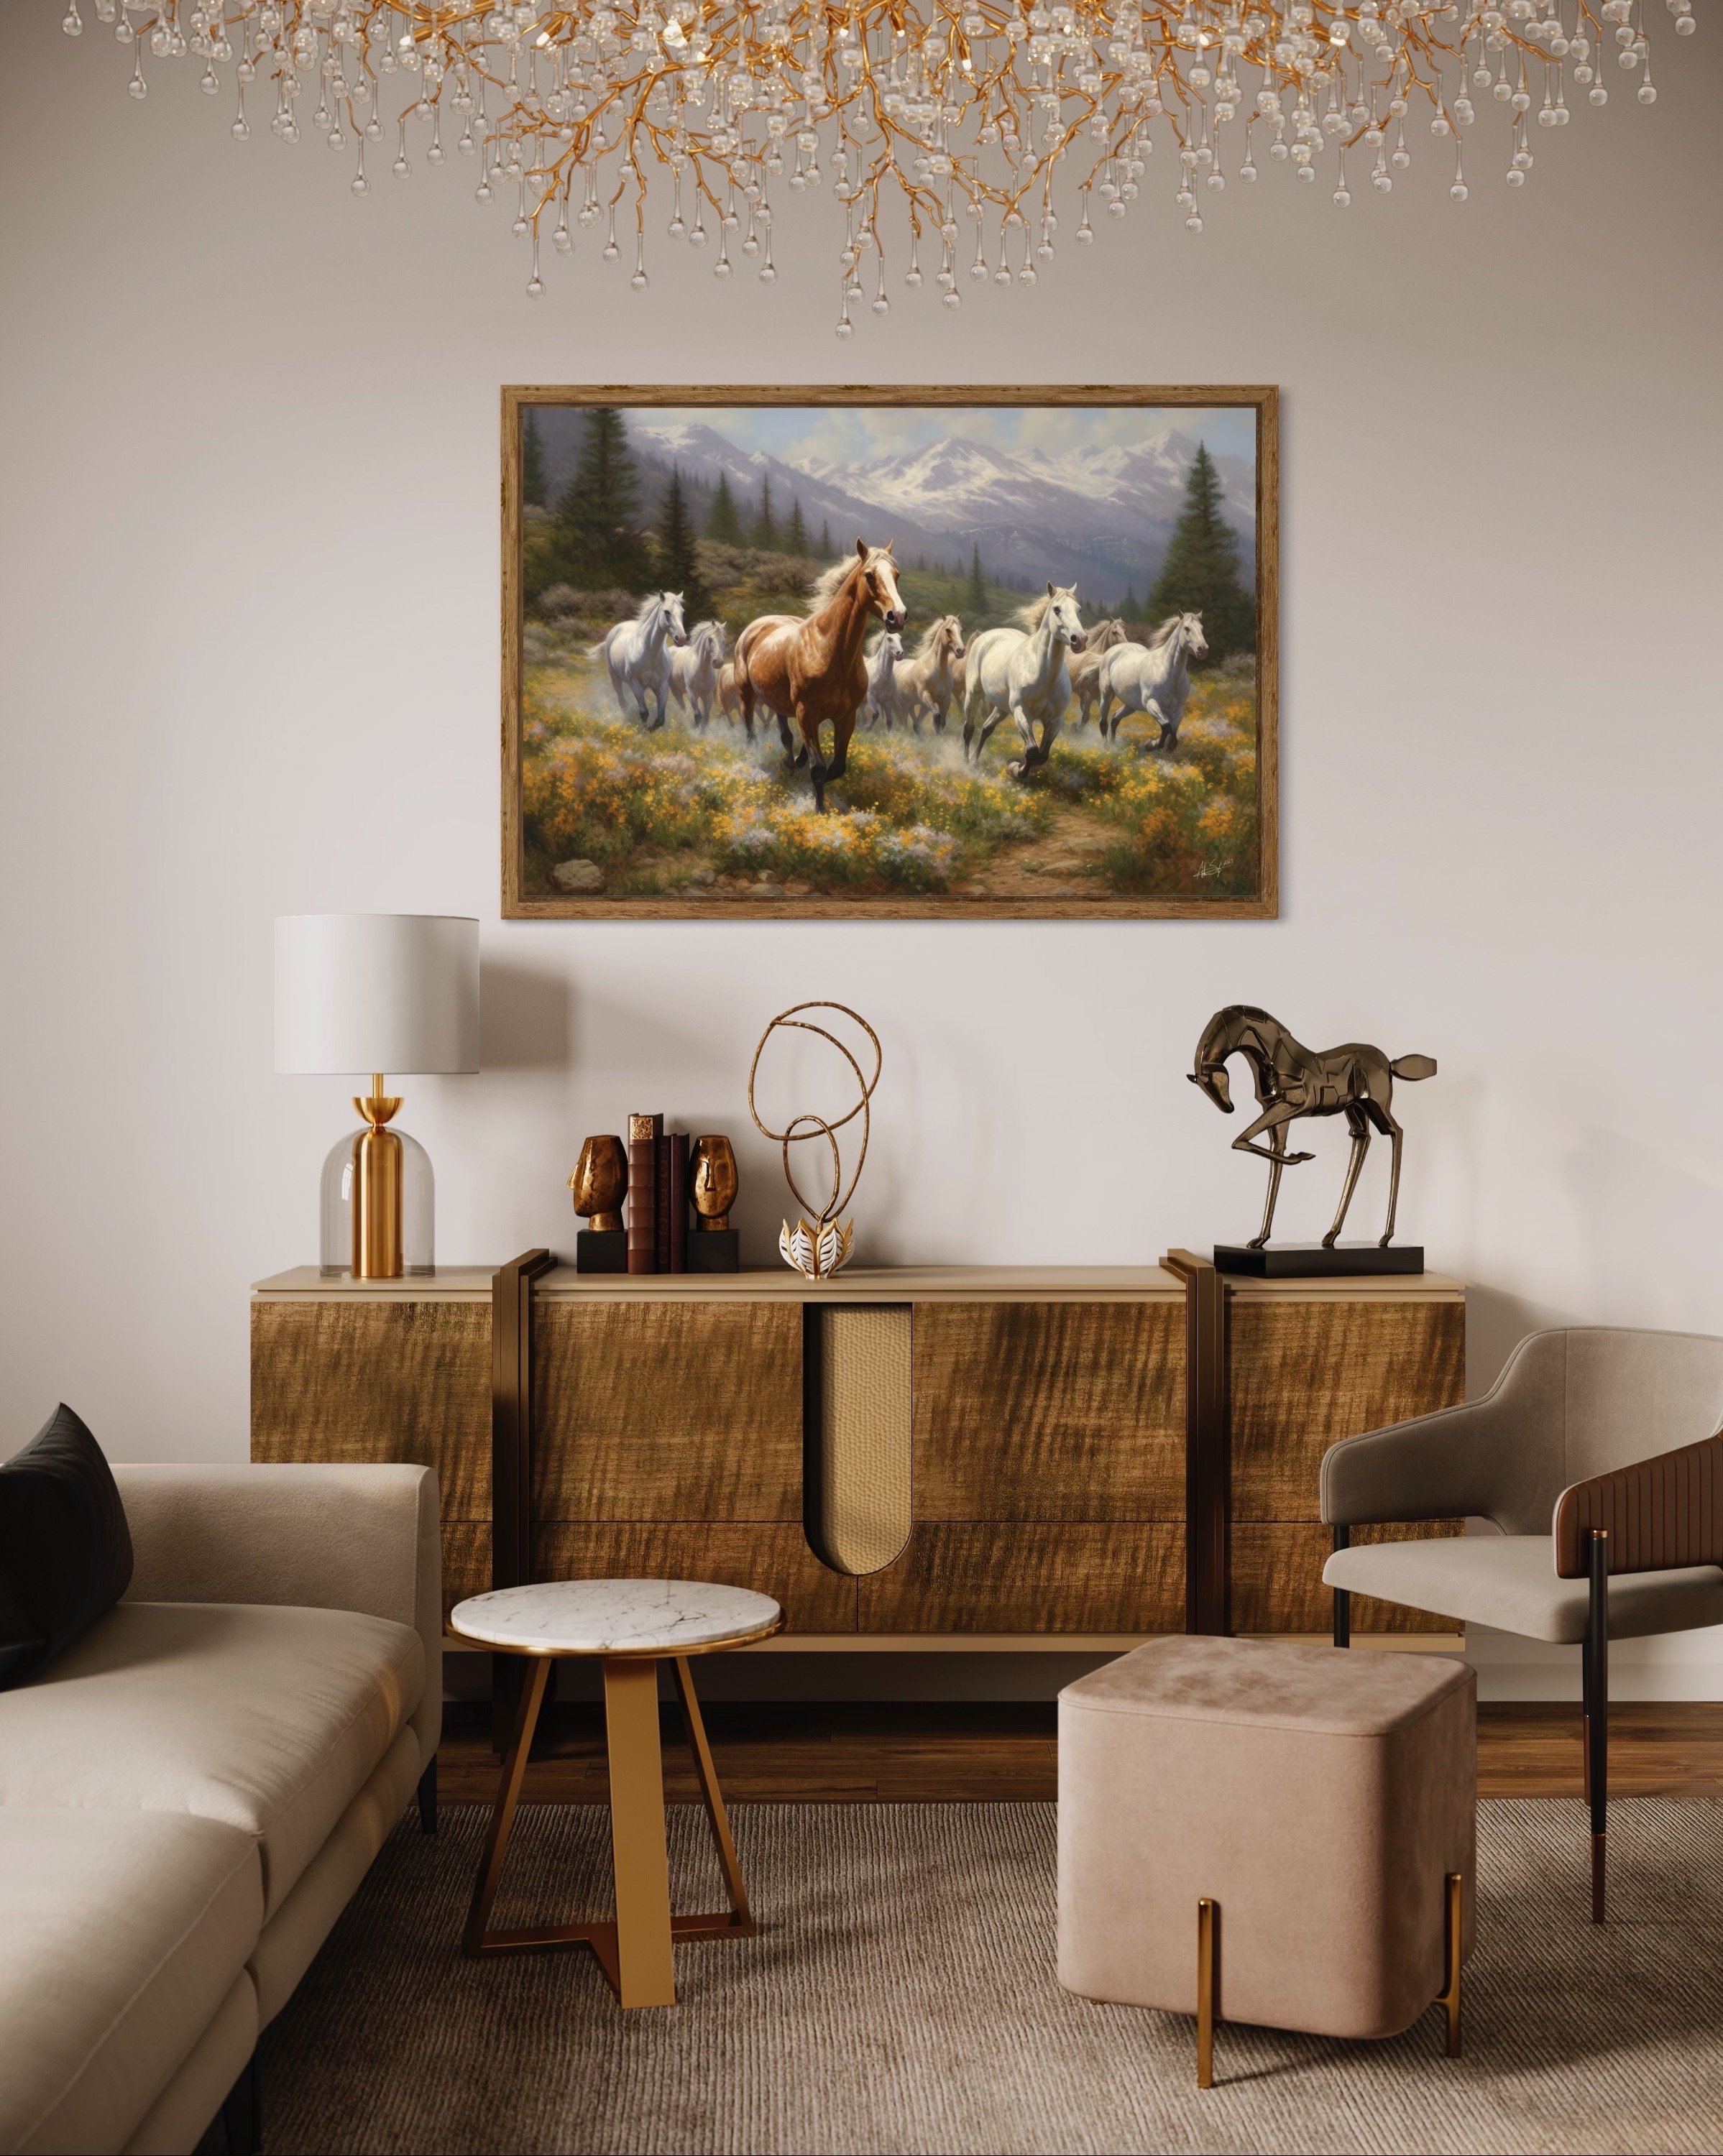 Free Roam | Horse Art Wild Painting Running Horses Floral Meadow Traditional Canvas Metal Wall Classic Home Decor